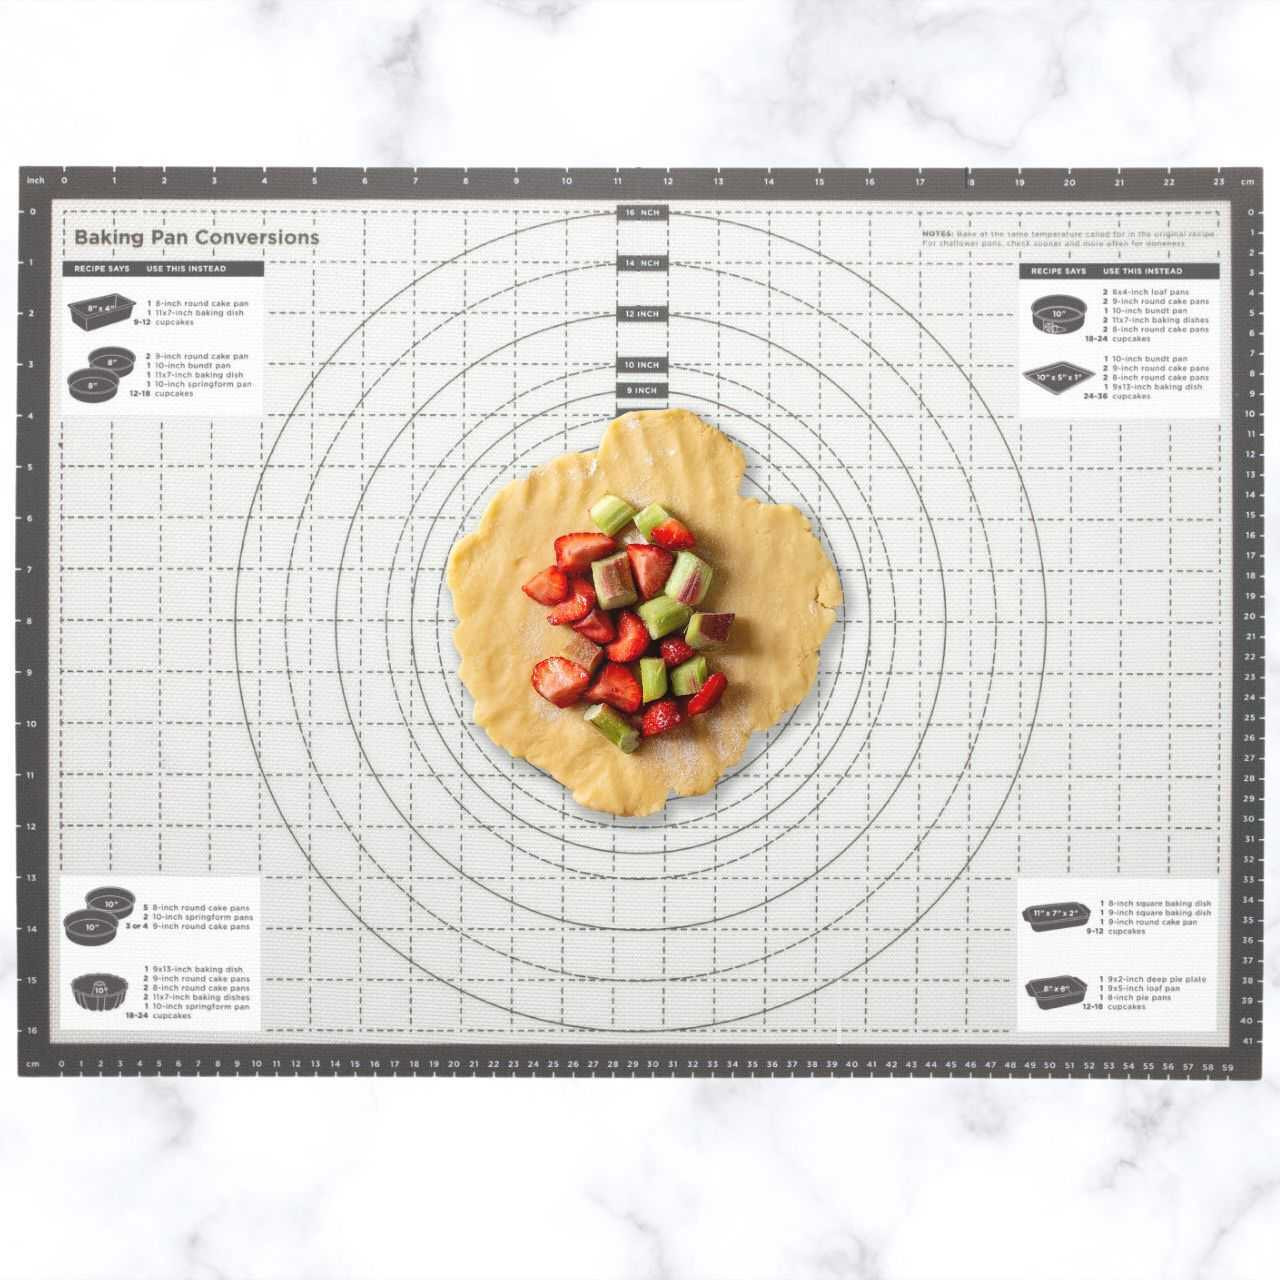 https://cdn11.bigcommerce.com/s-21kj3ntgv1/images/stencil/1280x1280/products/669/3059/Tovolo-Silicone-Pastry-Mat-with-Strawberry-Rhubarb-galette__50712.1687046283.jpg?c=2